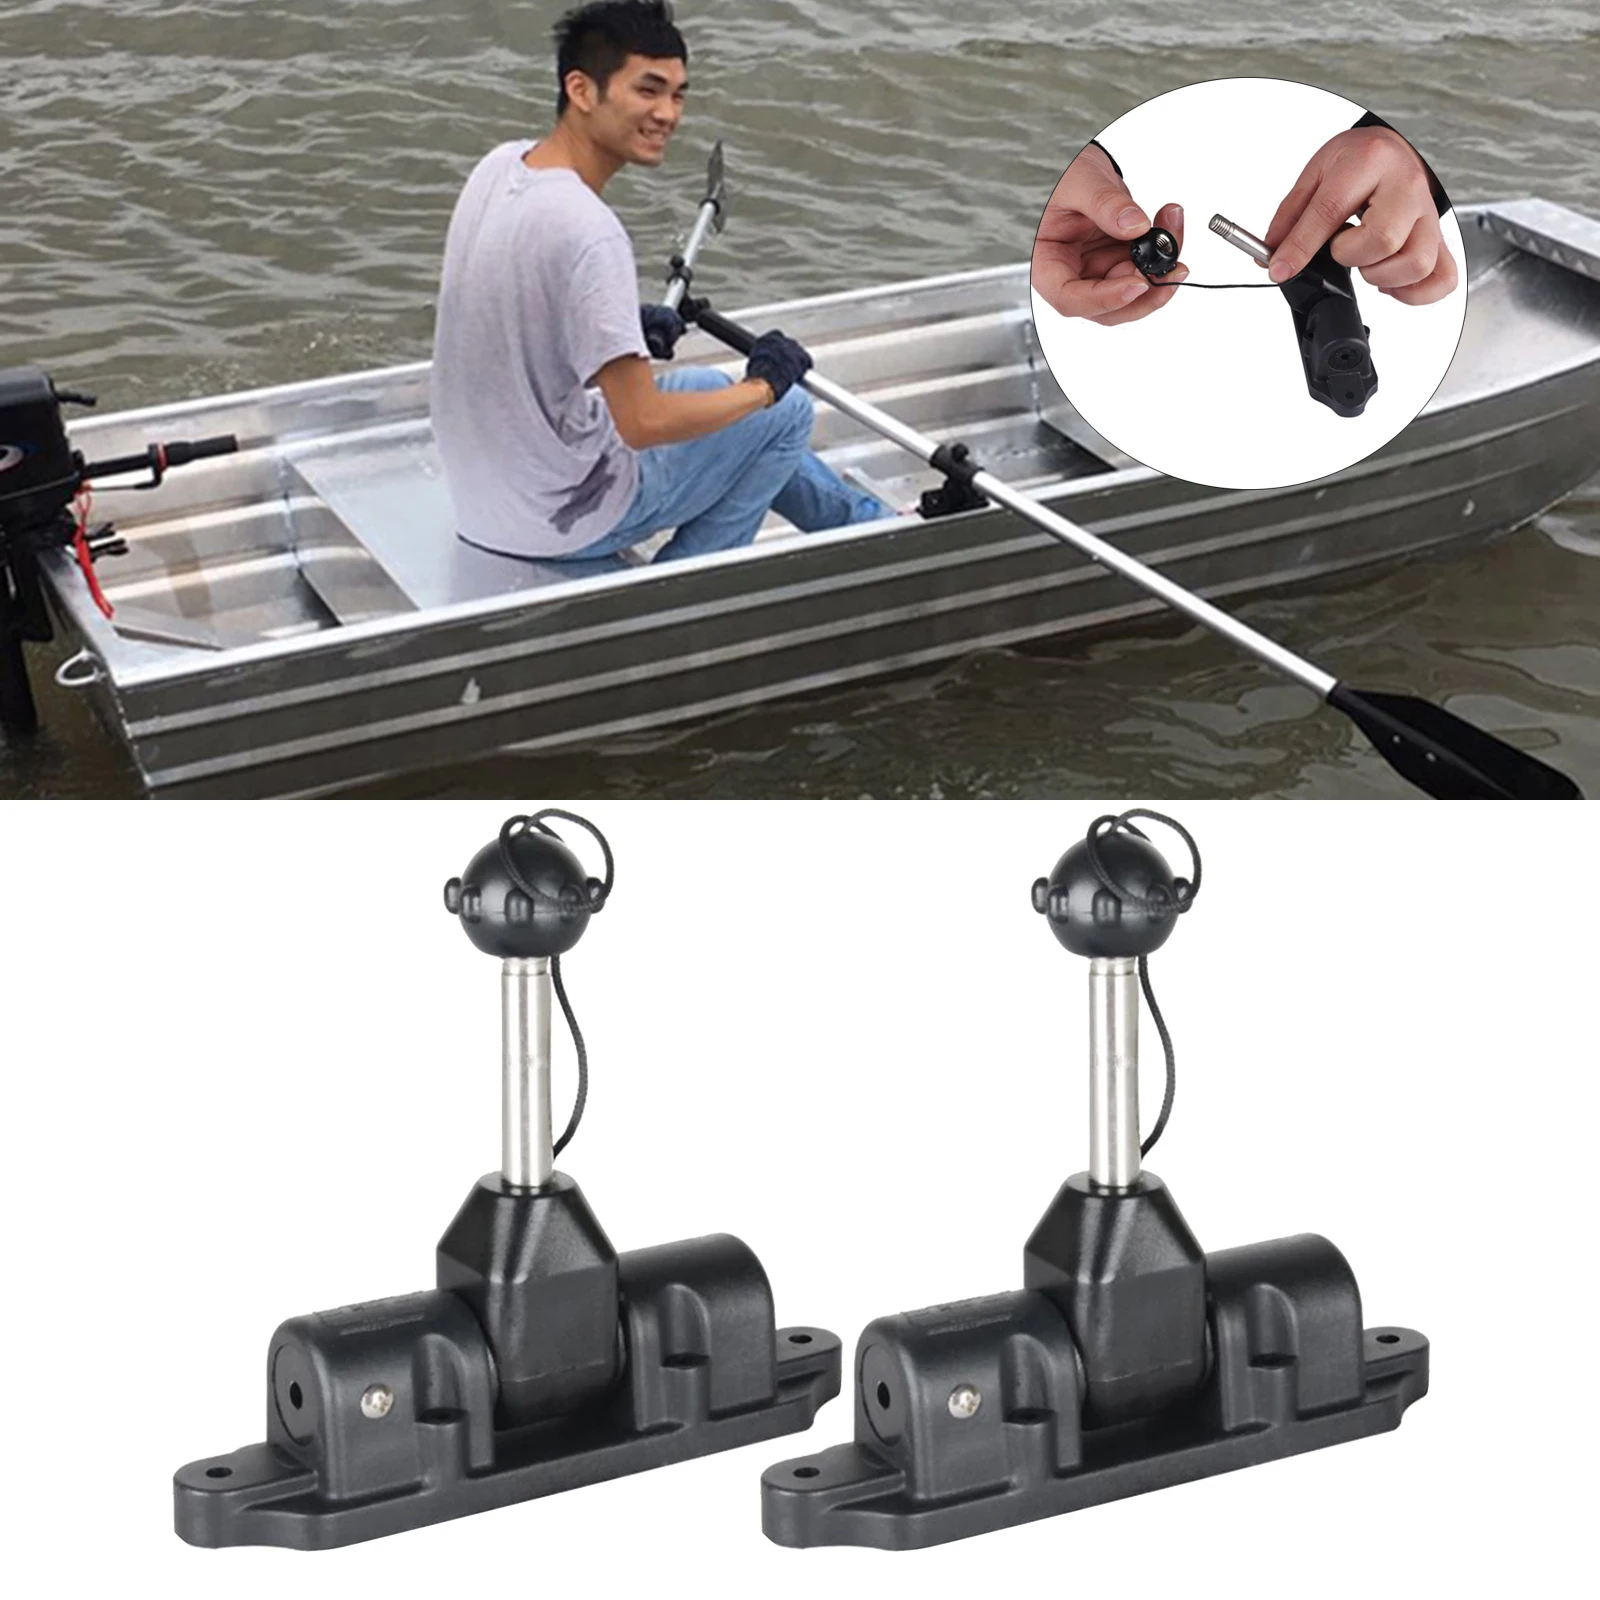 2 Pieces Universal Oar Holder Tie Down Paddle Lock Support Boat Raft Canoe